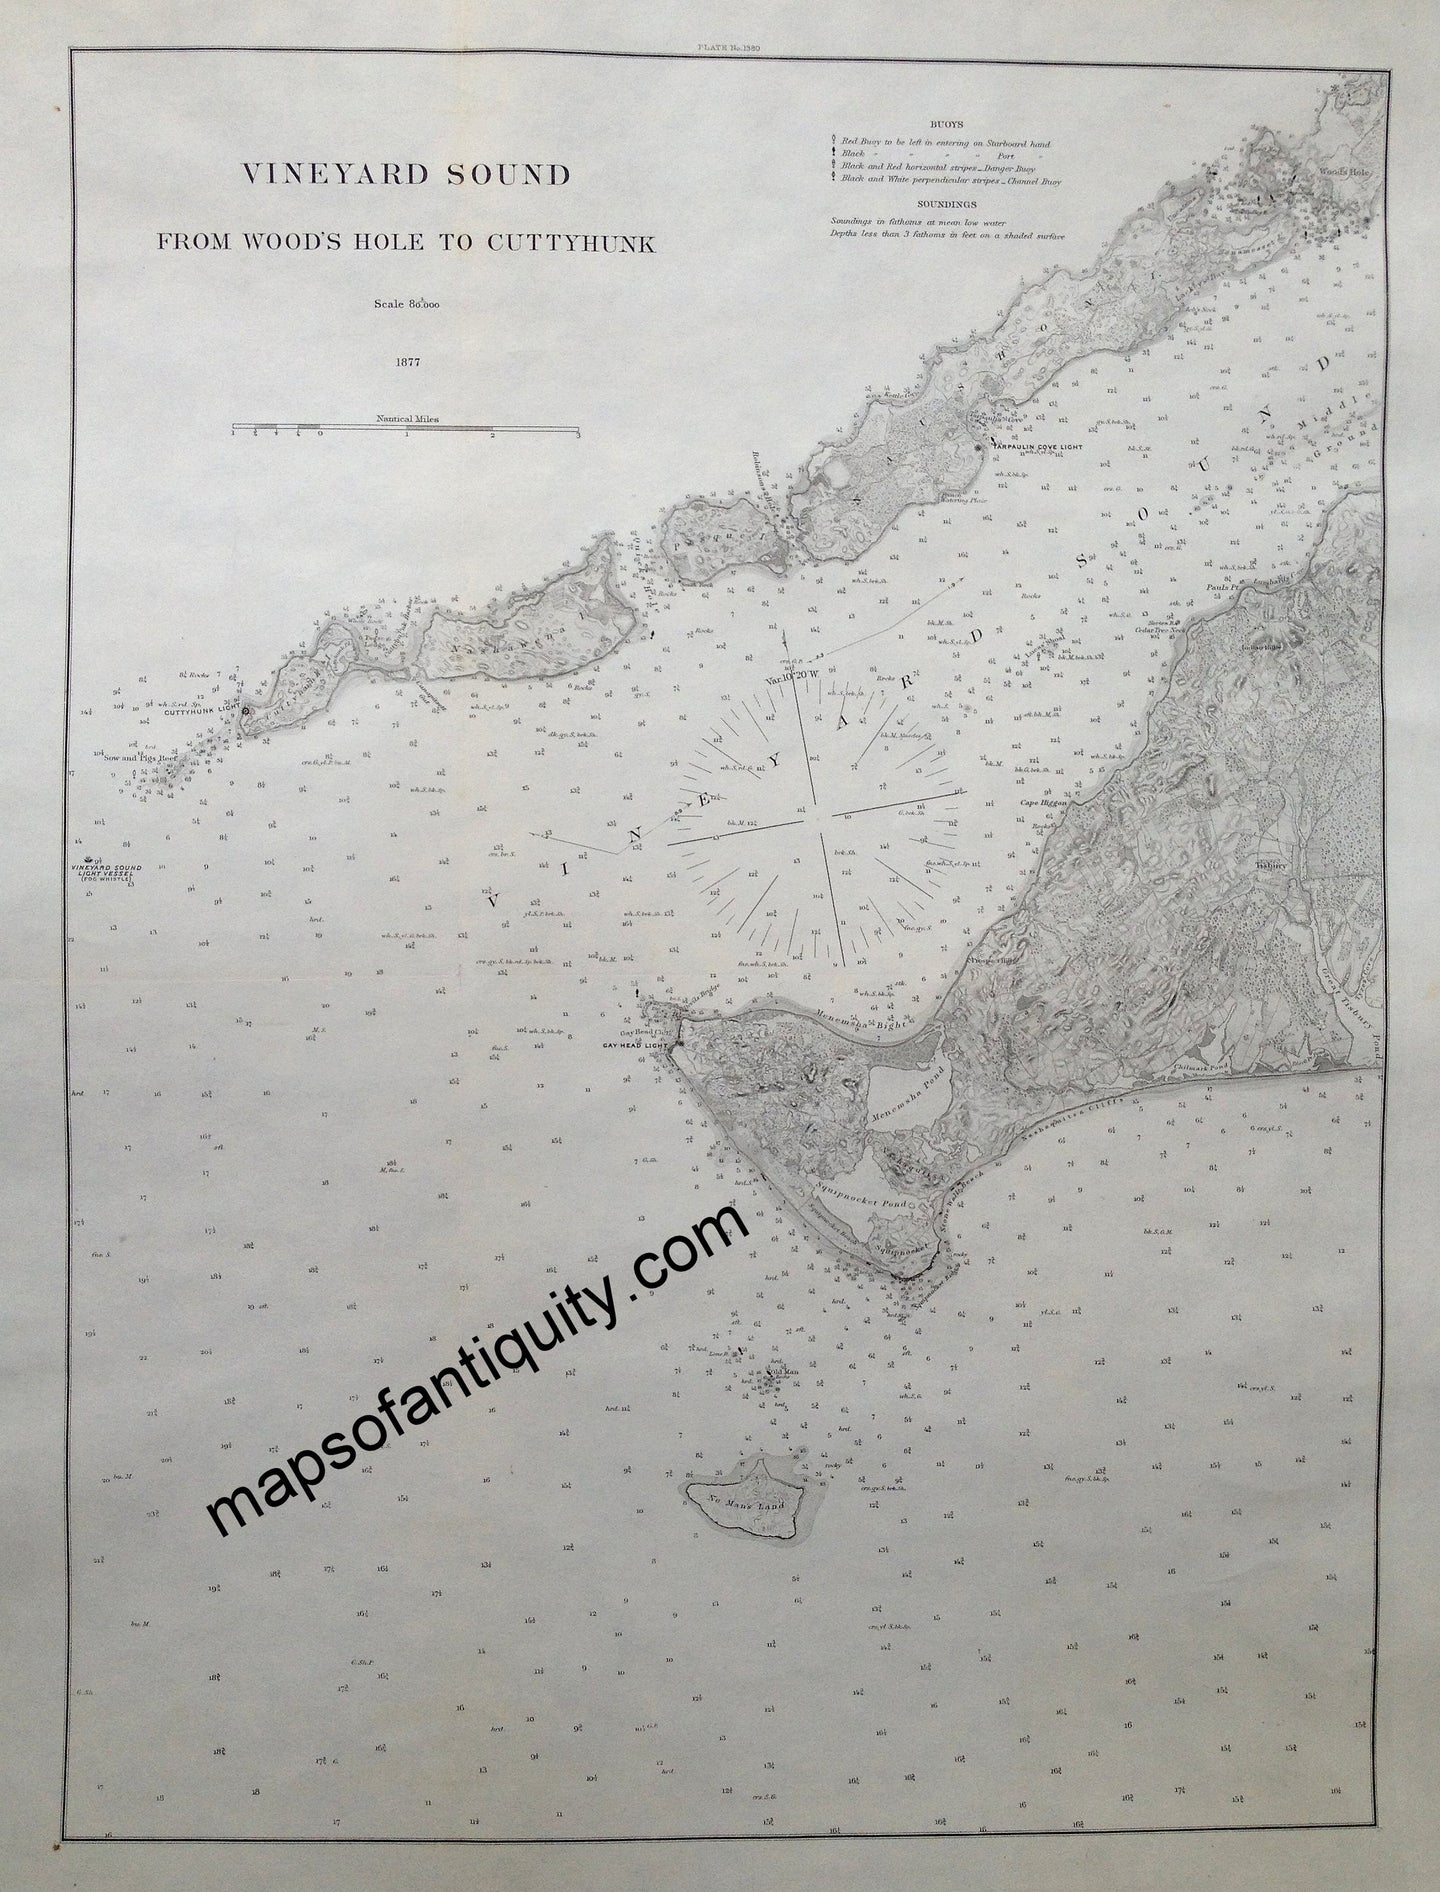 Black-and-White-Antique-Nautical-Chart-Vineyard-Sound-from-Wood's-Hole-to-Cuttyhunk-****-United-States-New-England-1877-US-Coast-Pilot-Maps-Of-Antiquity